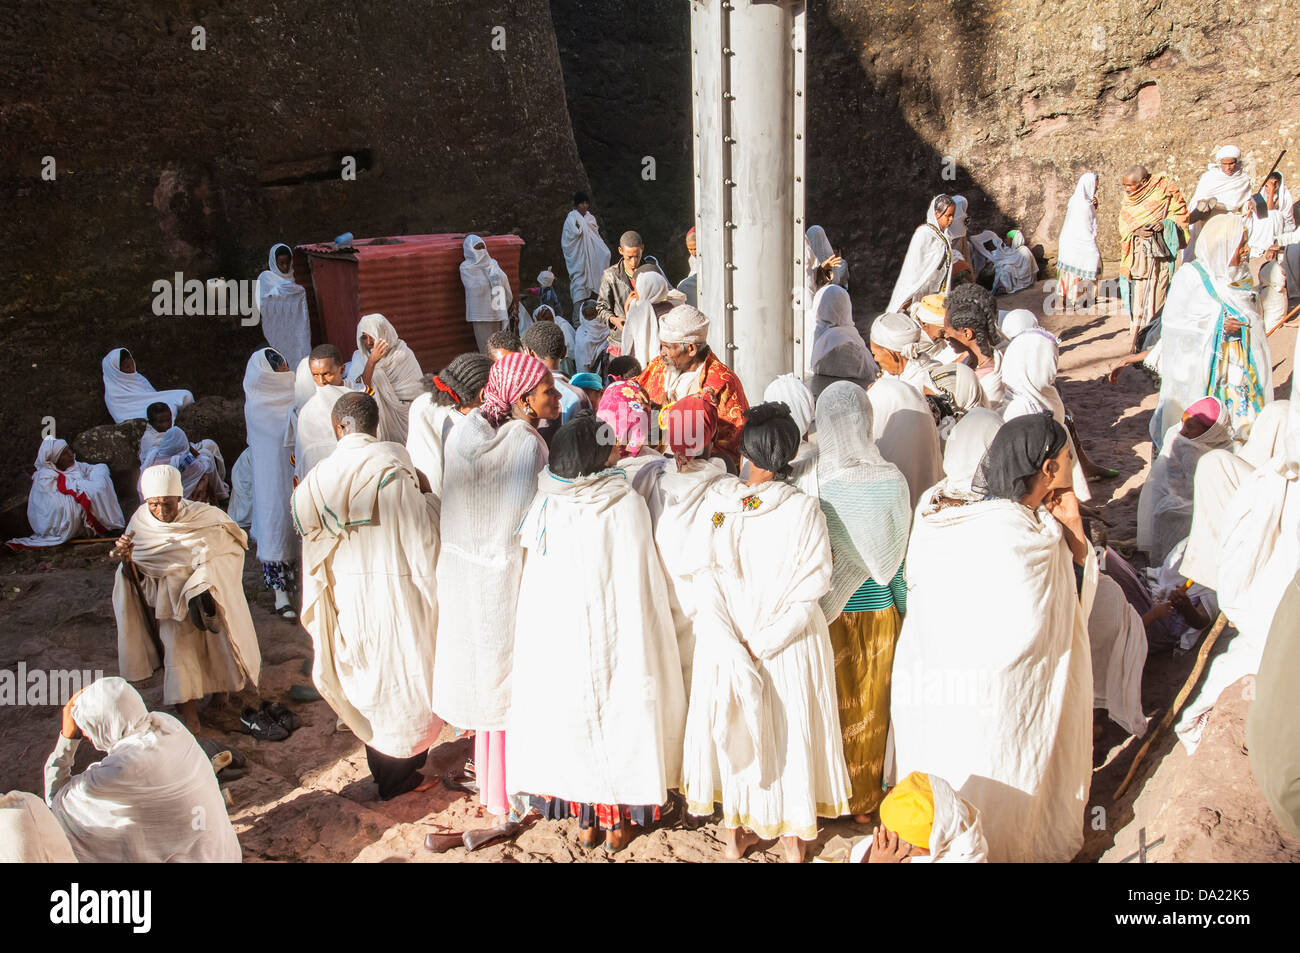 Pilgrims with the traditional white shawl attending a ceremony at the Bete Medhane Alem Church, Lalibela, Ethiopia Stock Photo